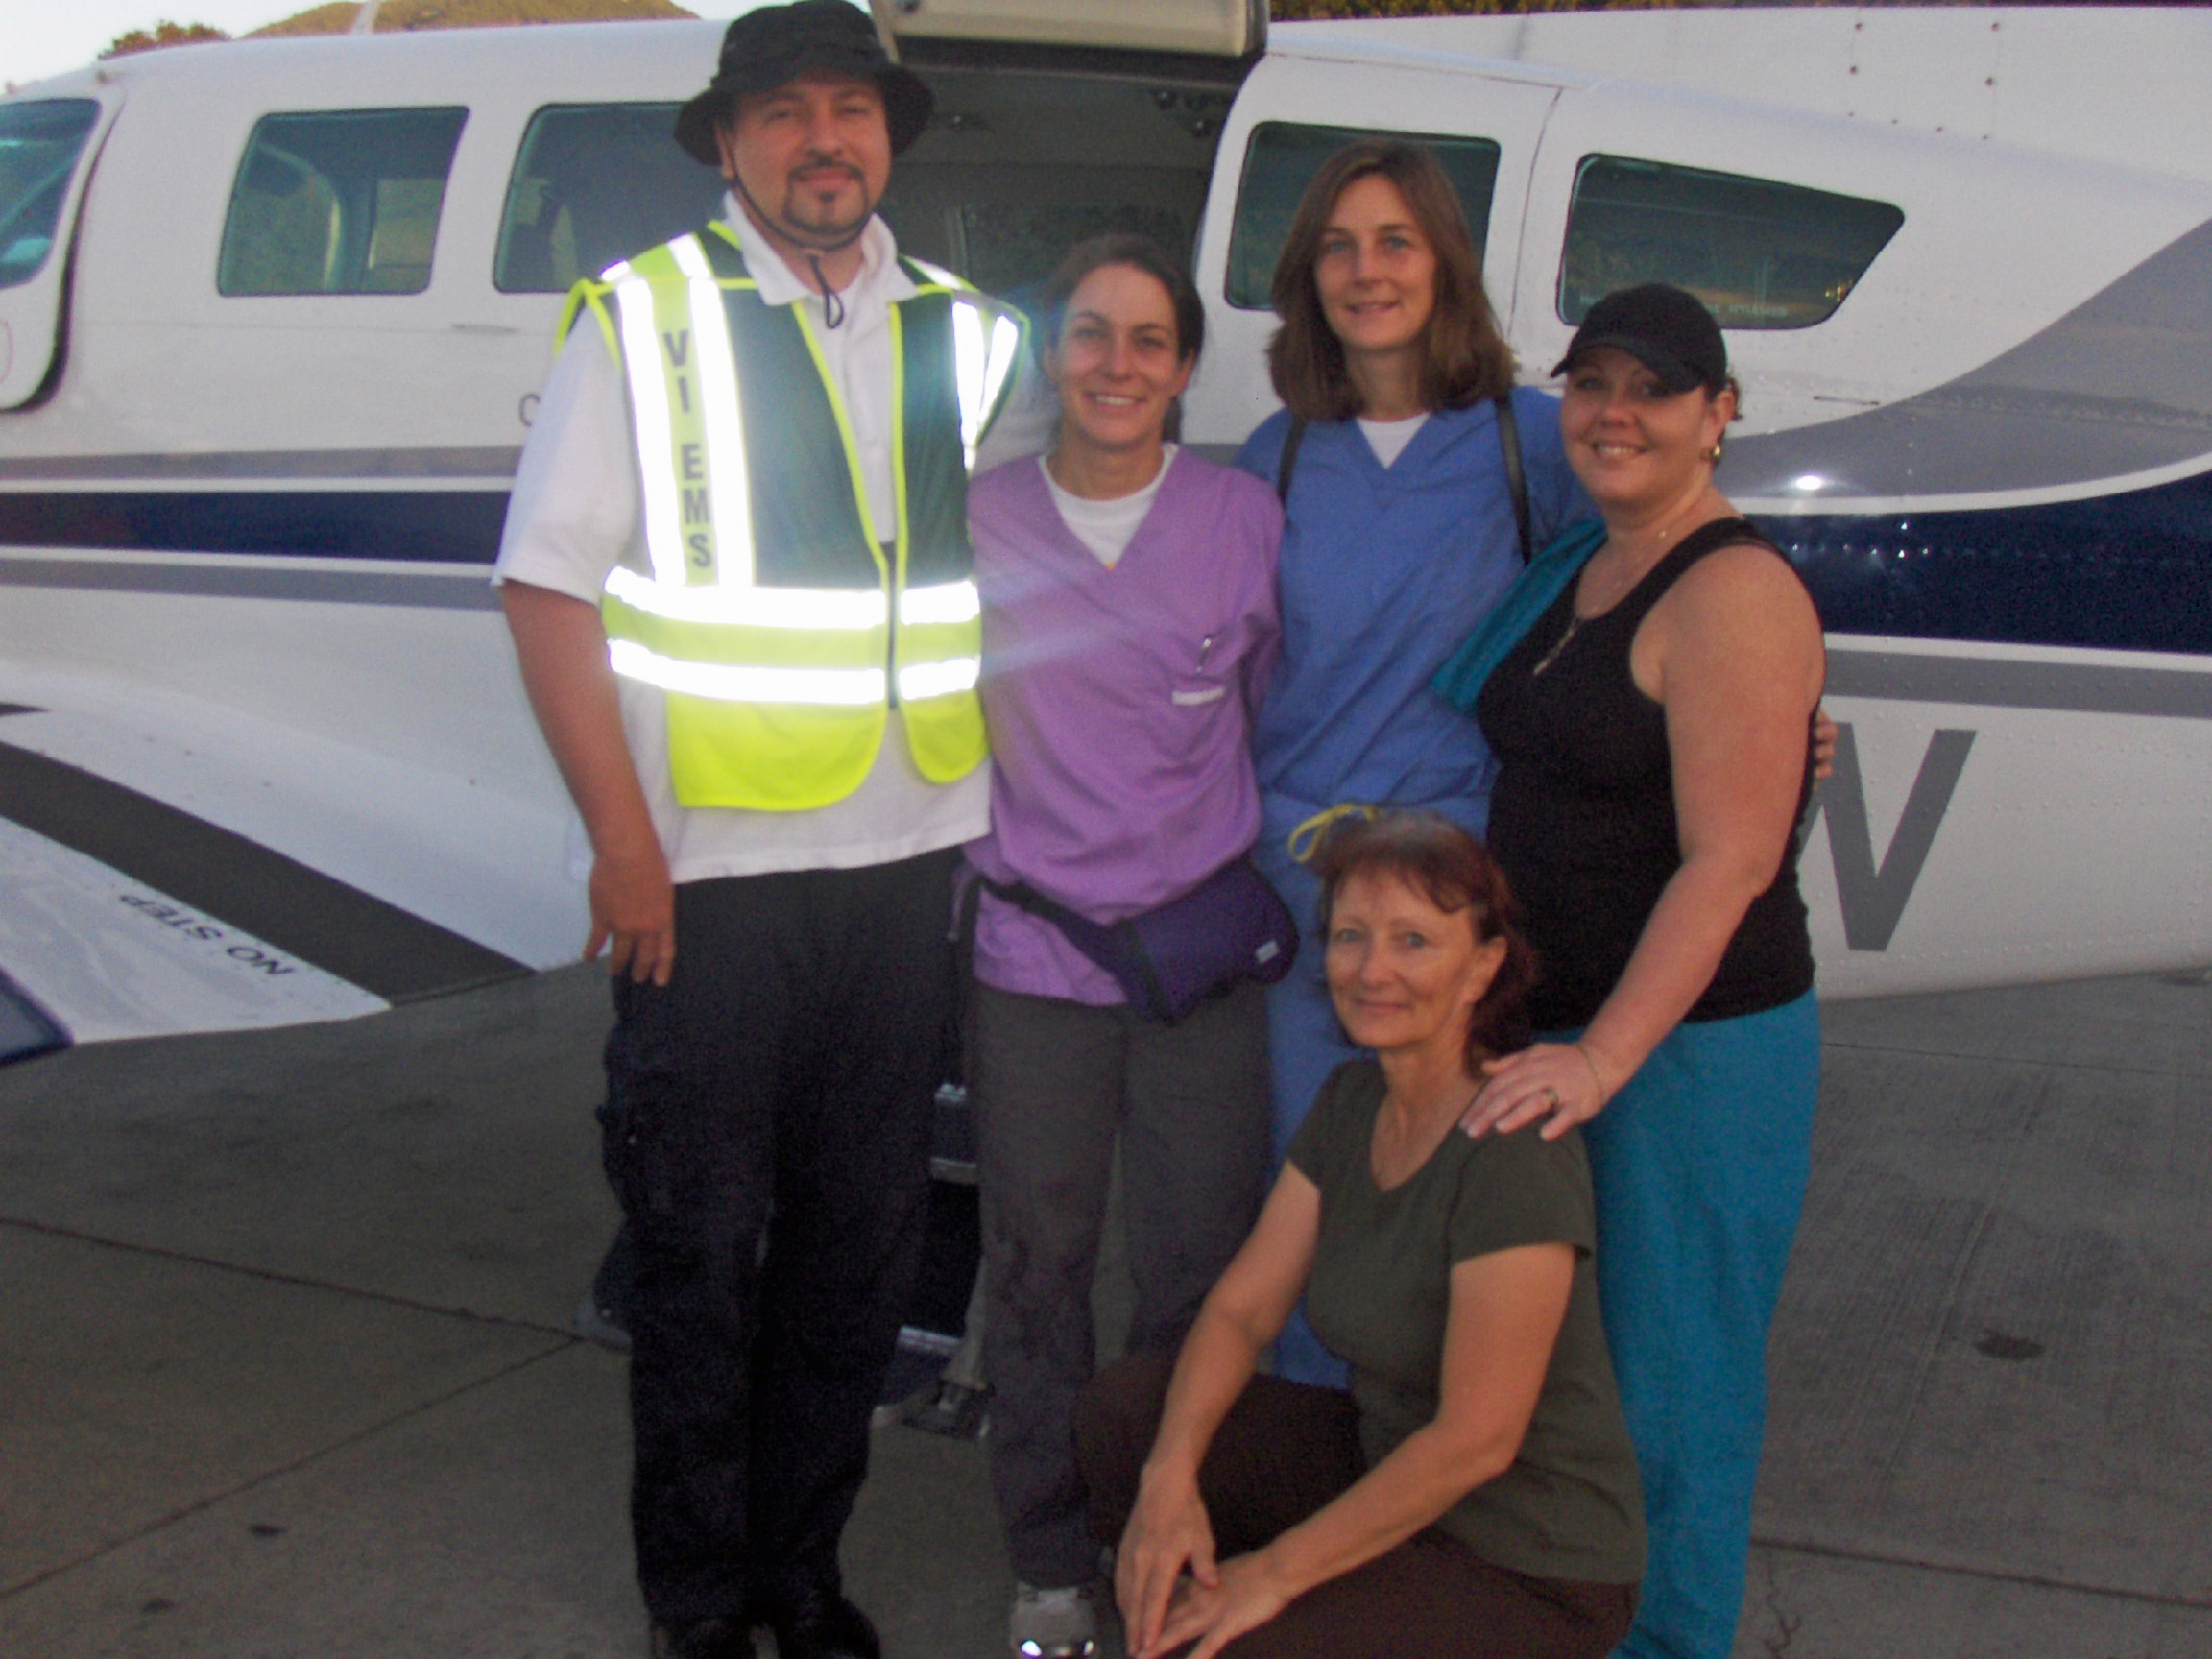 The latest Crazy Diamonds are (from left) EMT Lisle Evelyn, Drs. Catherine Colby and Kathleen Hunt, nurse Brandi Cook, with logician Chloe Beyer (front).